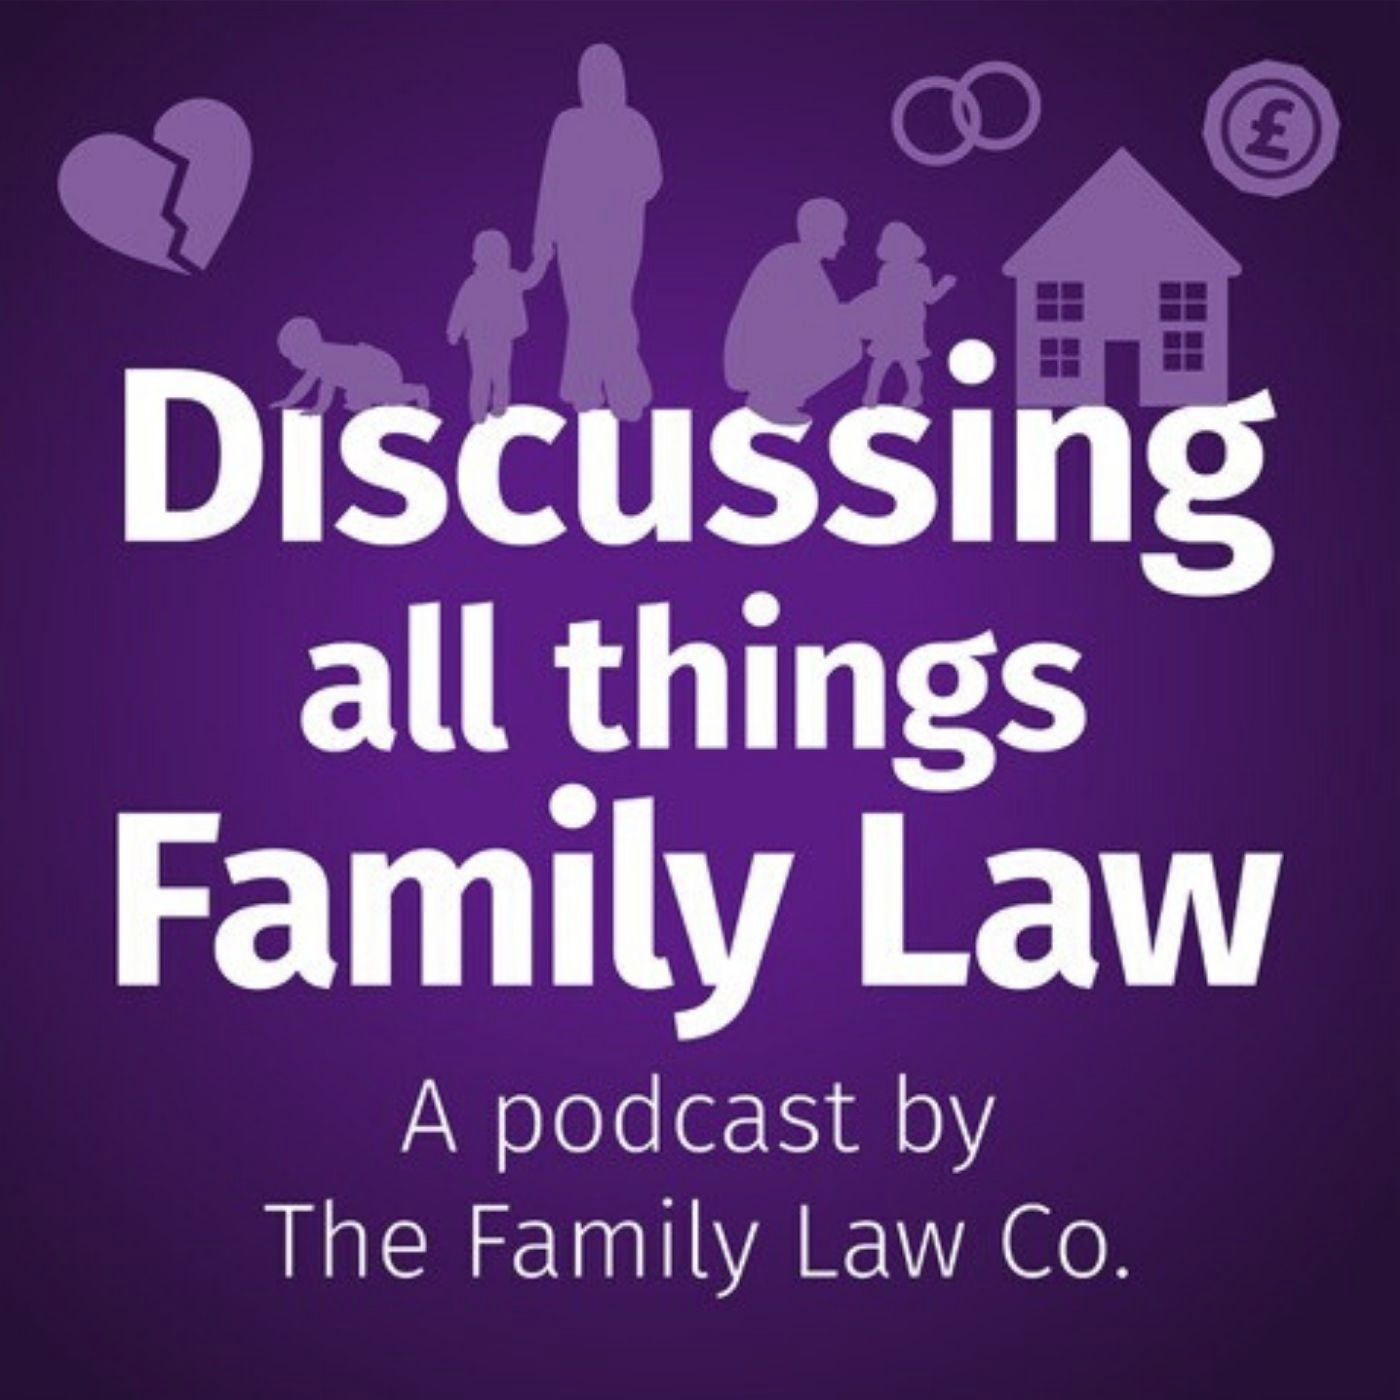 All Things Family Law